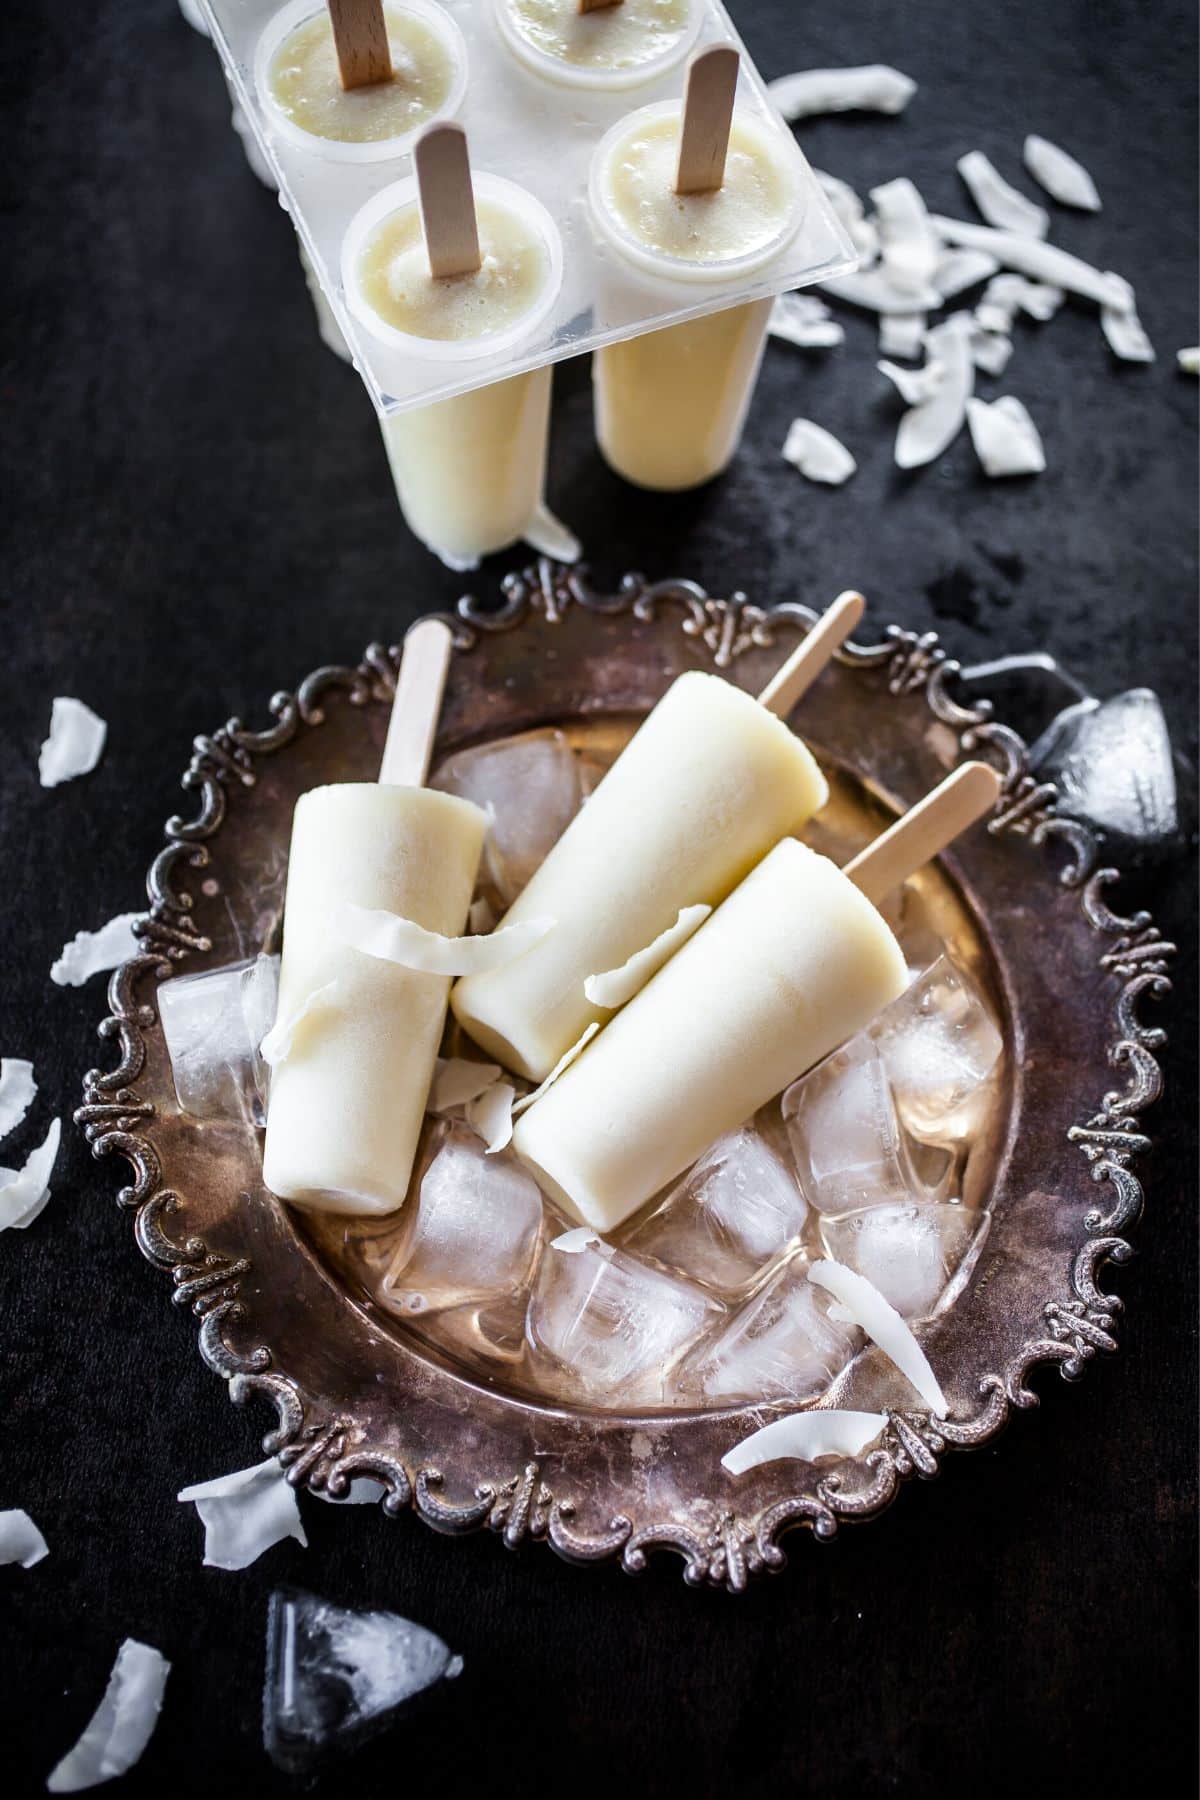 Banana popsicles on a decorate plate with ice.